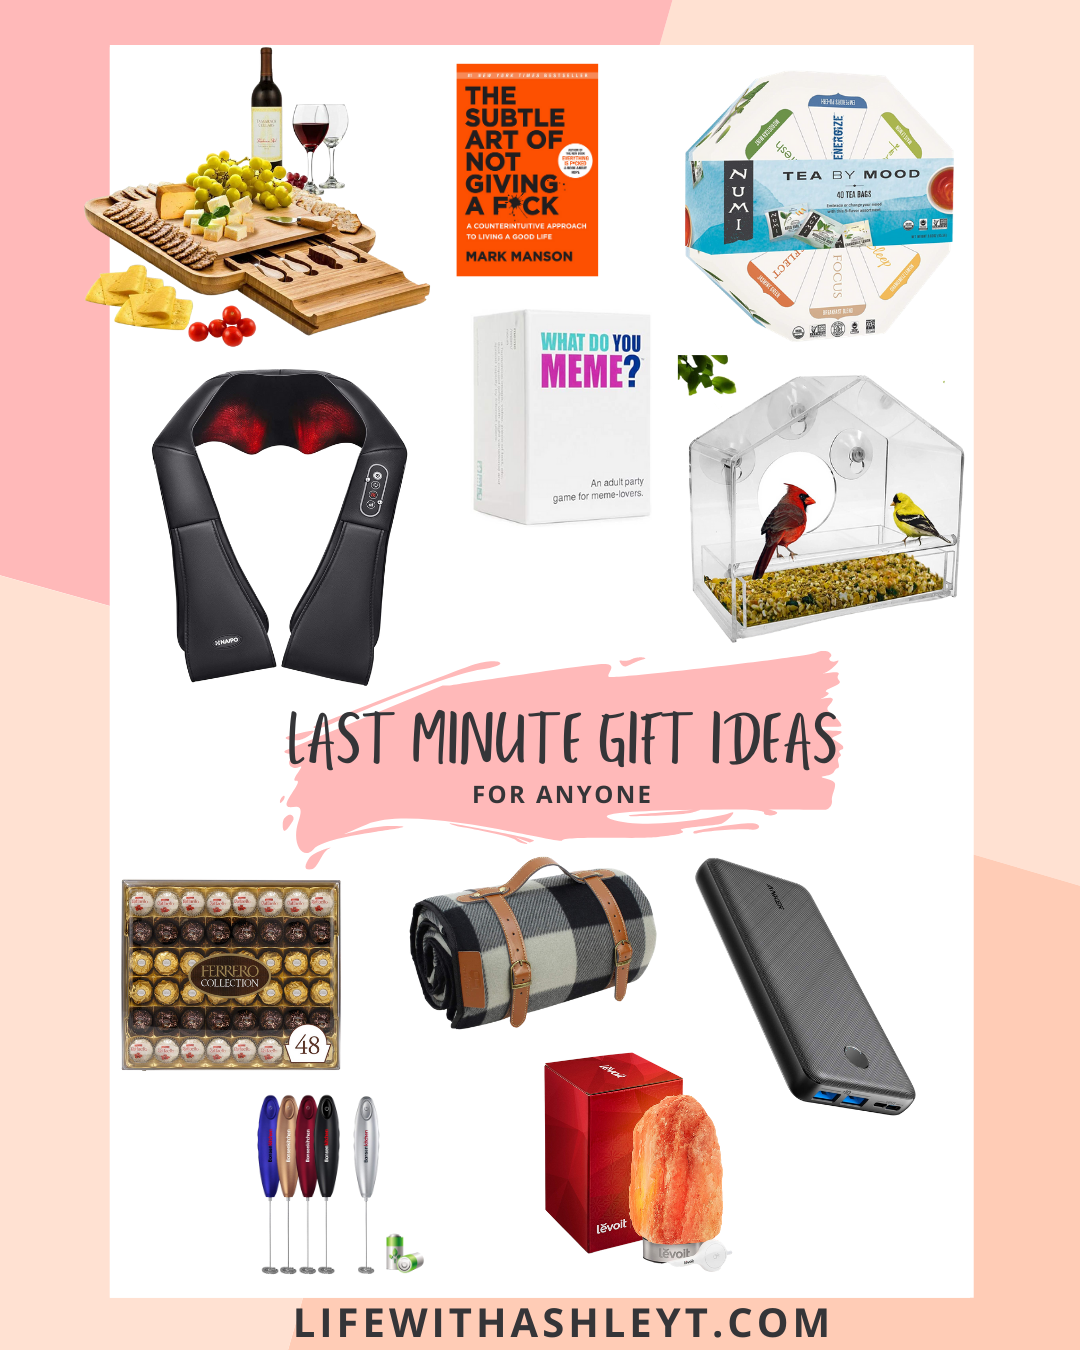 https://lifewithashleyt.com/wp-content/uploads/2020/12/Last-Minute-Gift-Ideas-for-Anyone.png